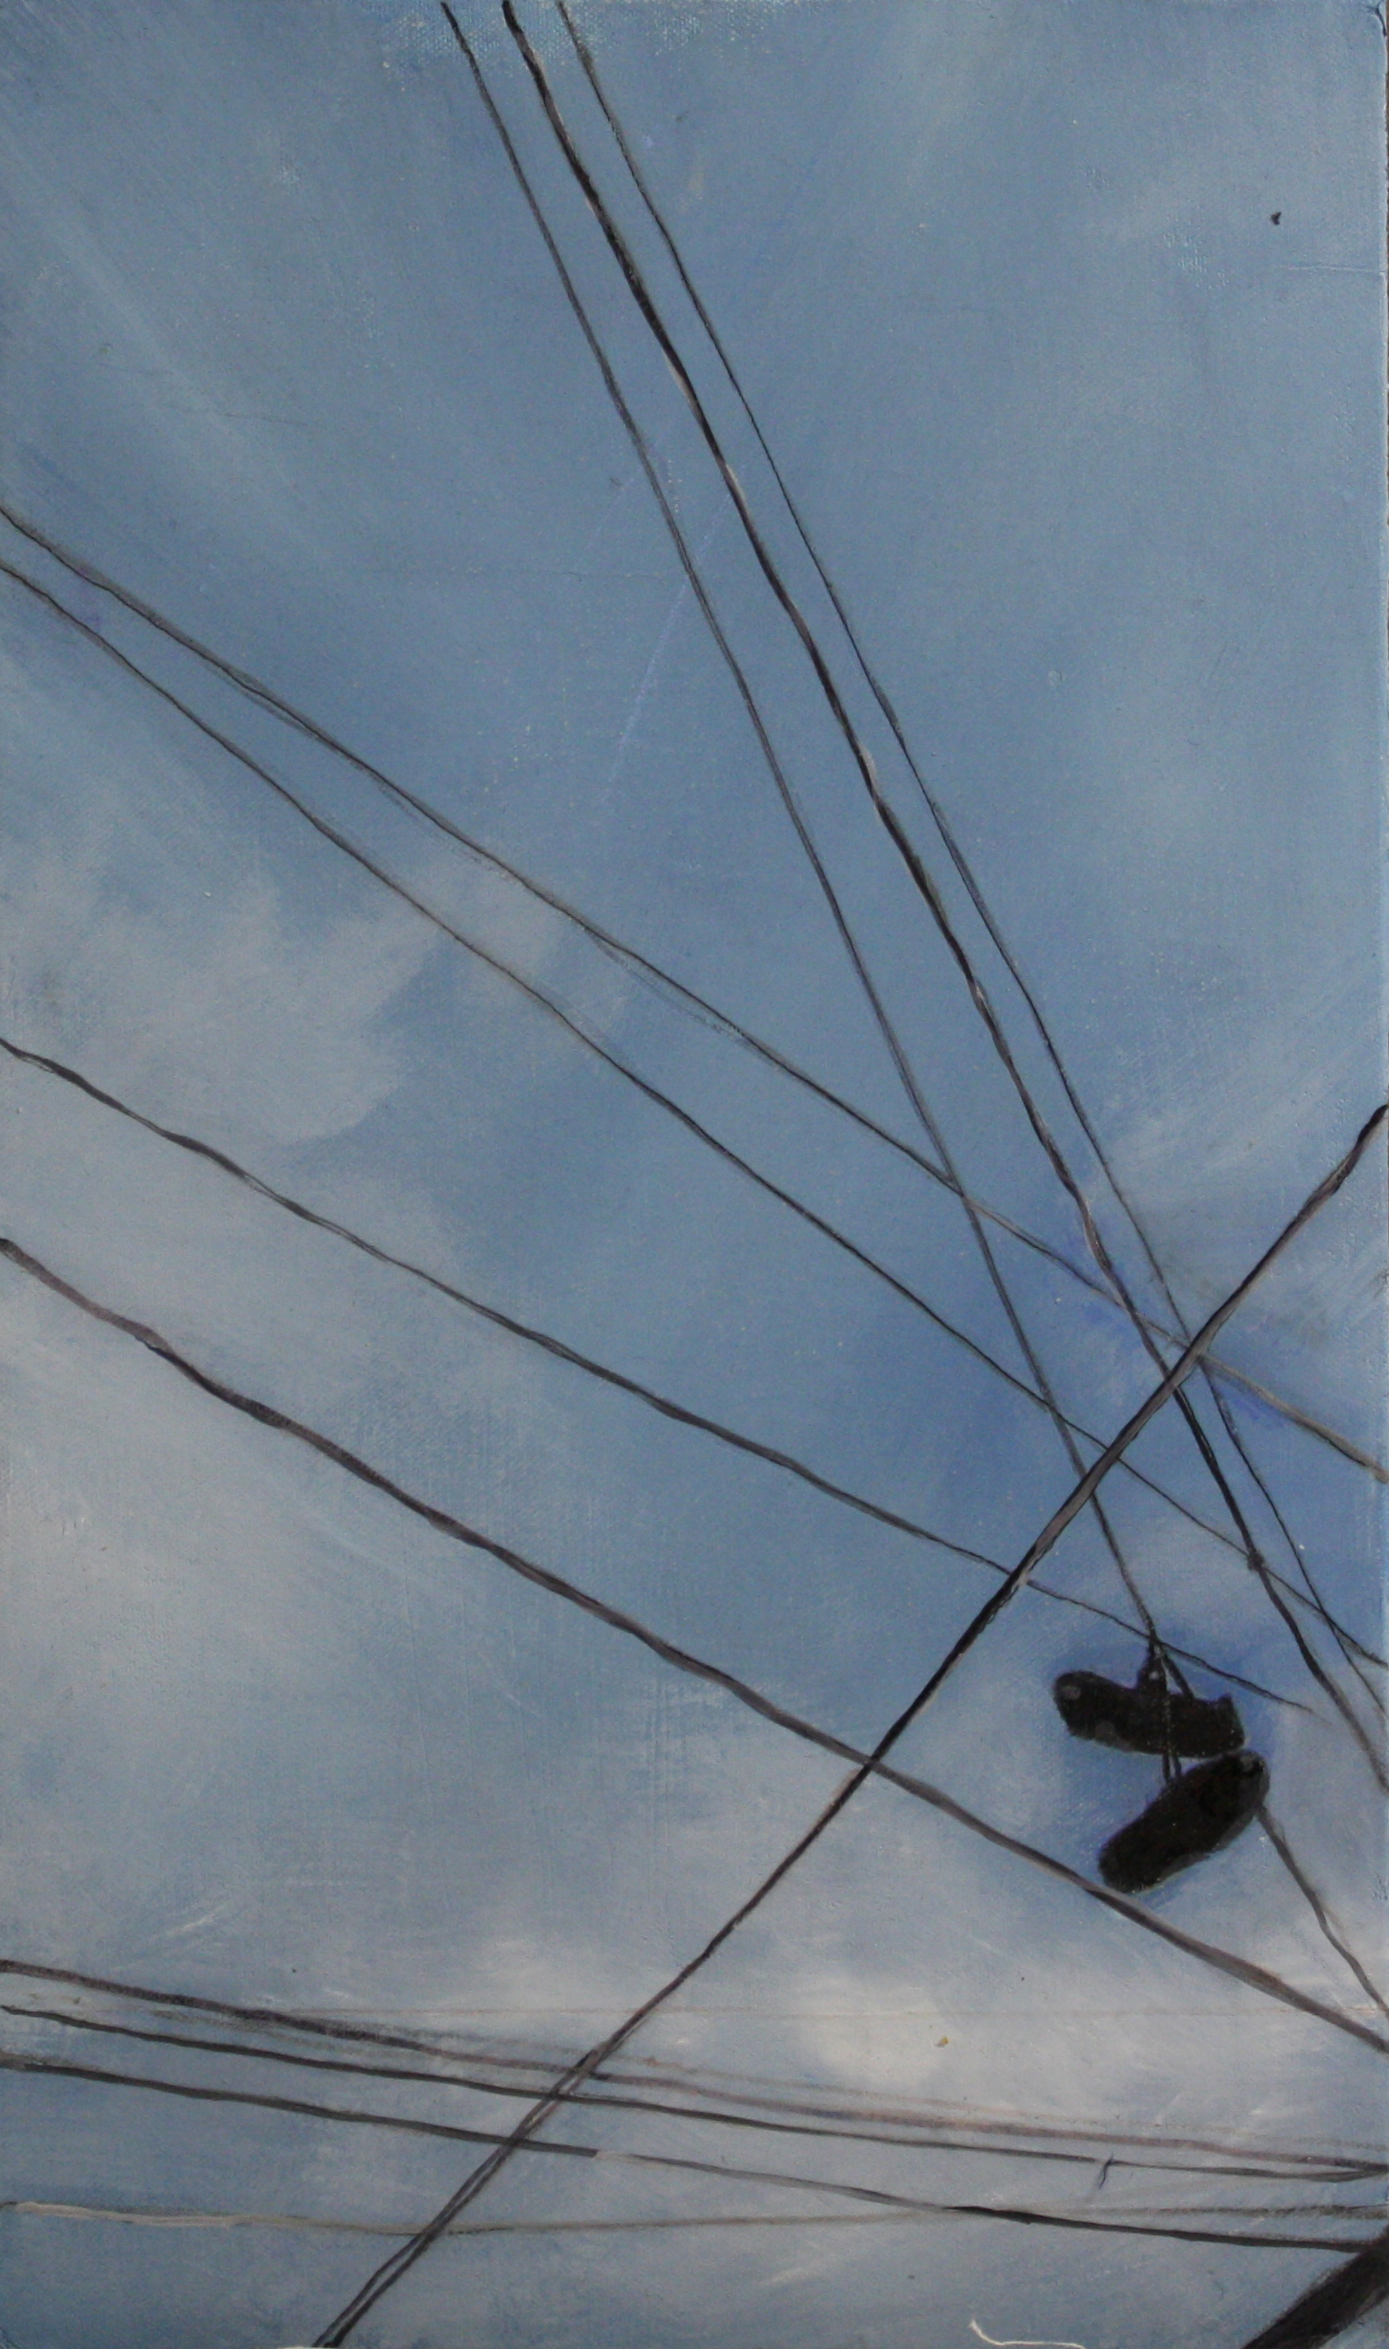  Wires:  Left hanging   2011, oil on canvas on hardboard  50 x 76 cm       